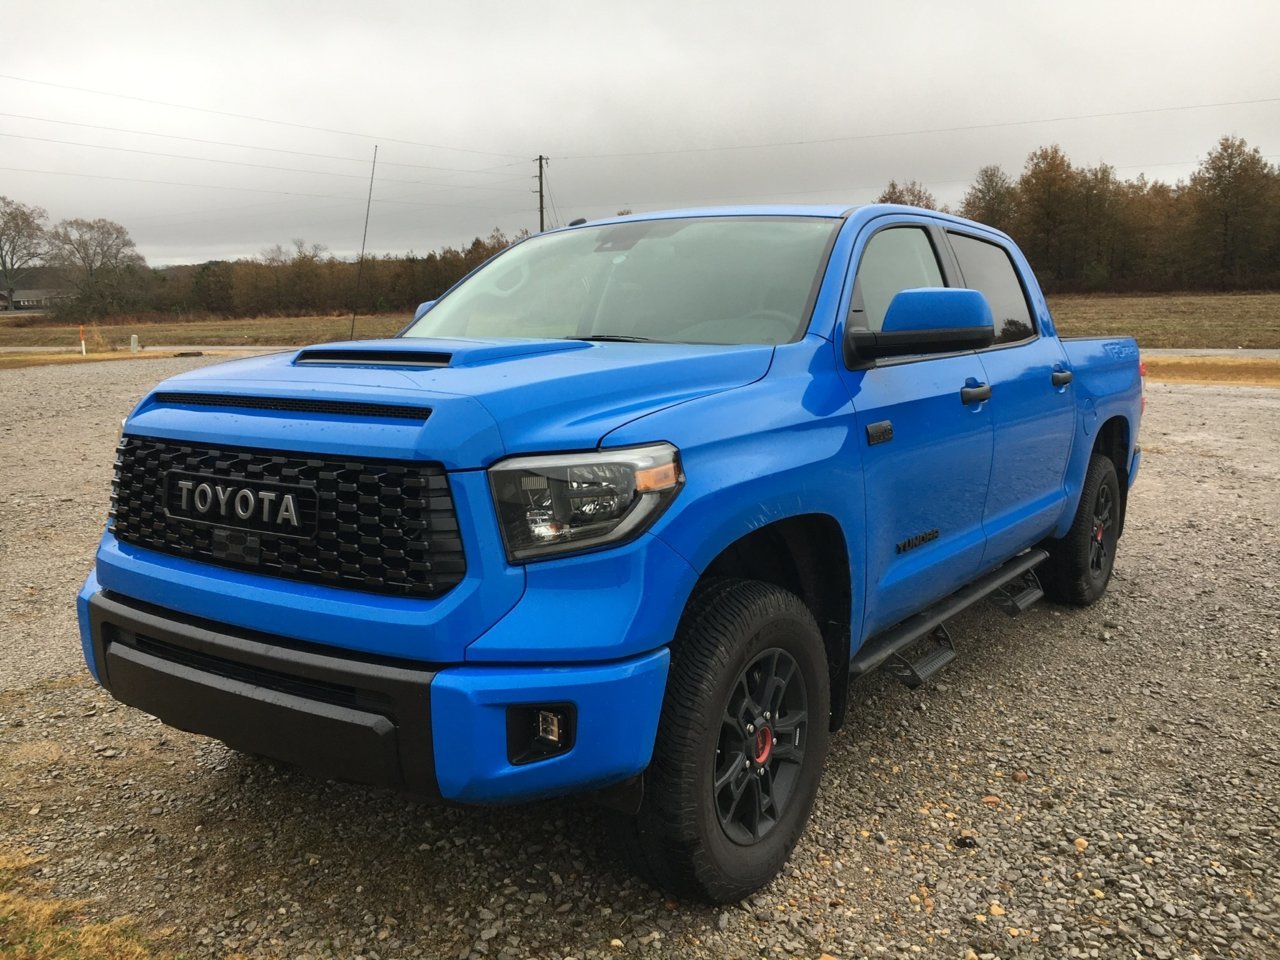 Sell Me On A 2020 Tundra | Toyota Tundra Forum